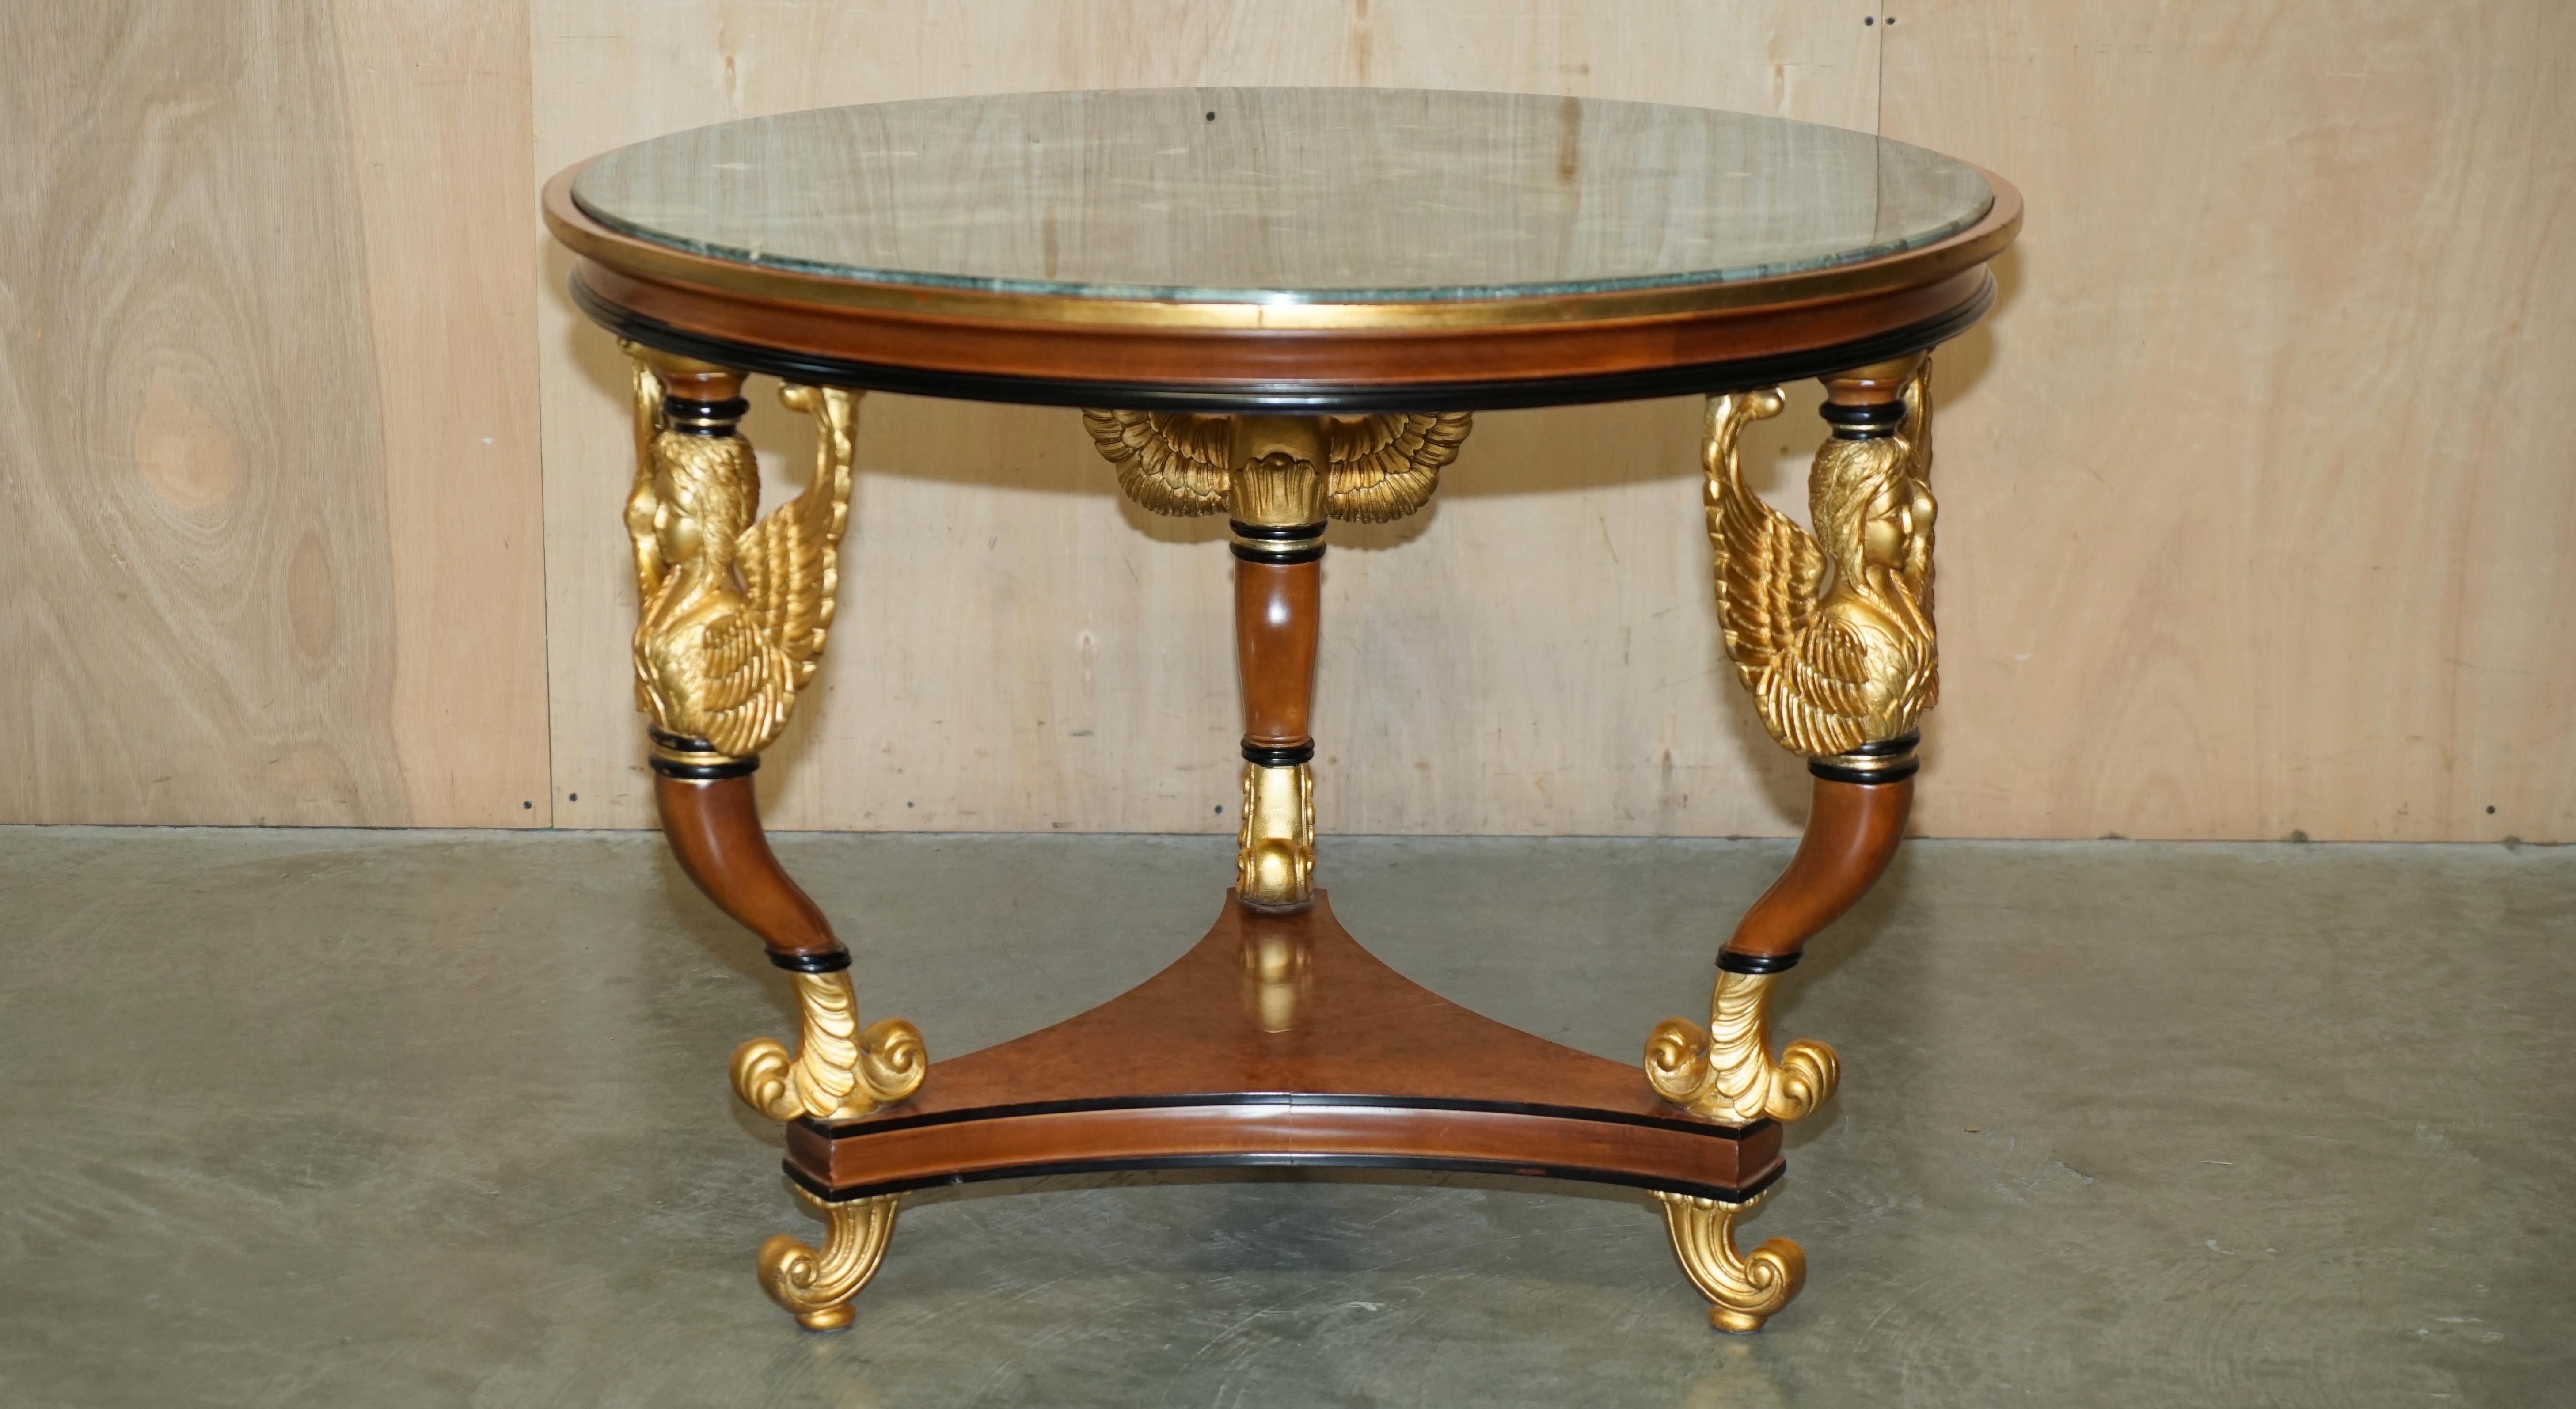 Egyptian Revival VINTAGE EGYPTIAN REVIVAL SPHINX GiLTWOOD & MARBLE CENTRE OCCASIONAL TABLE For Sale